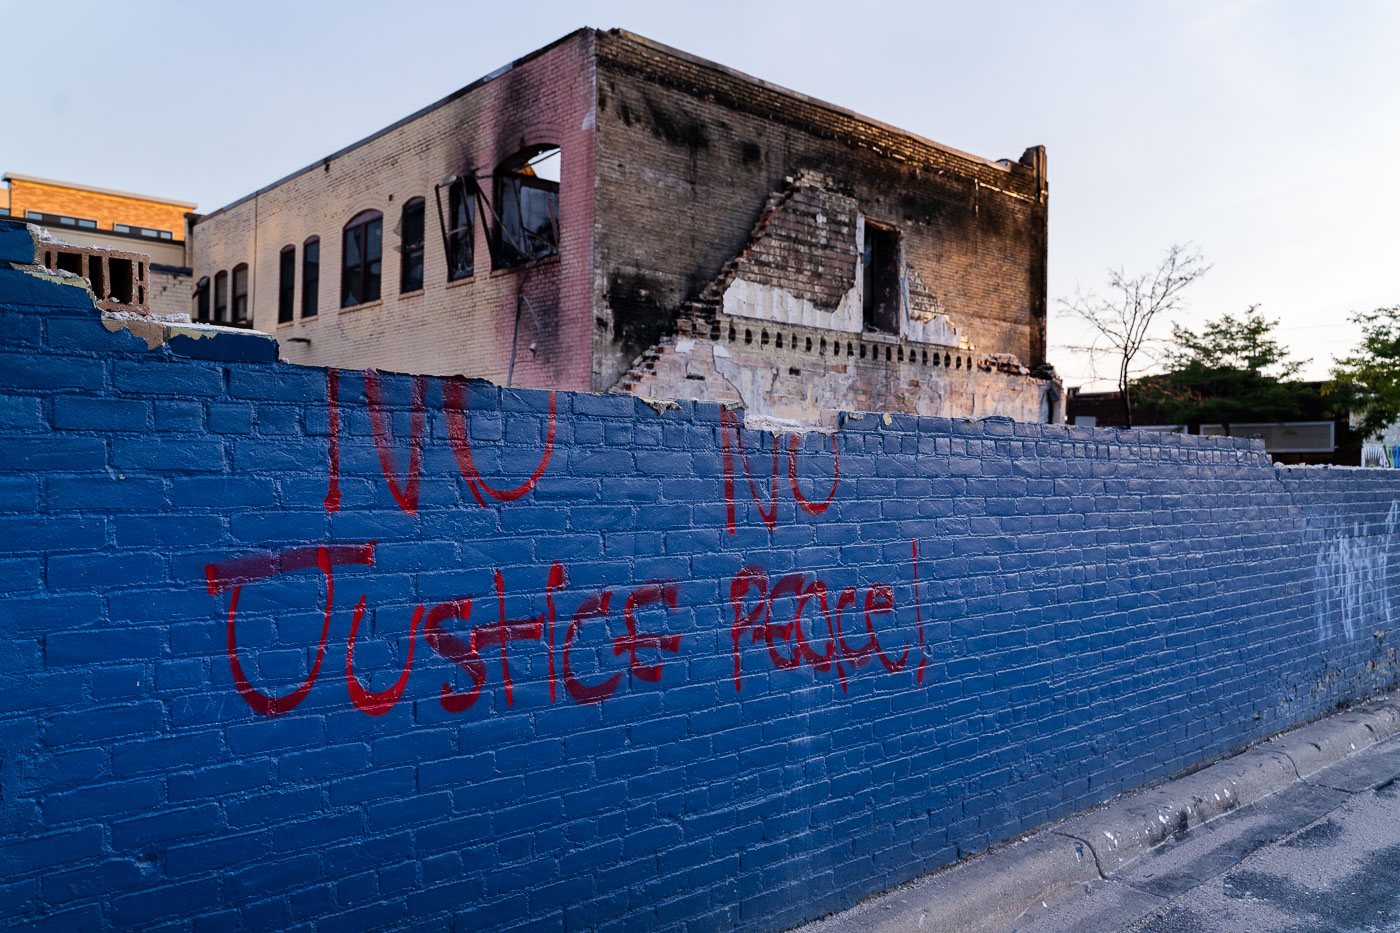 No Justice No peace on whats let of a burned building